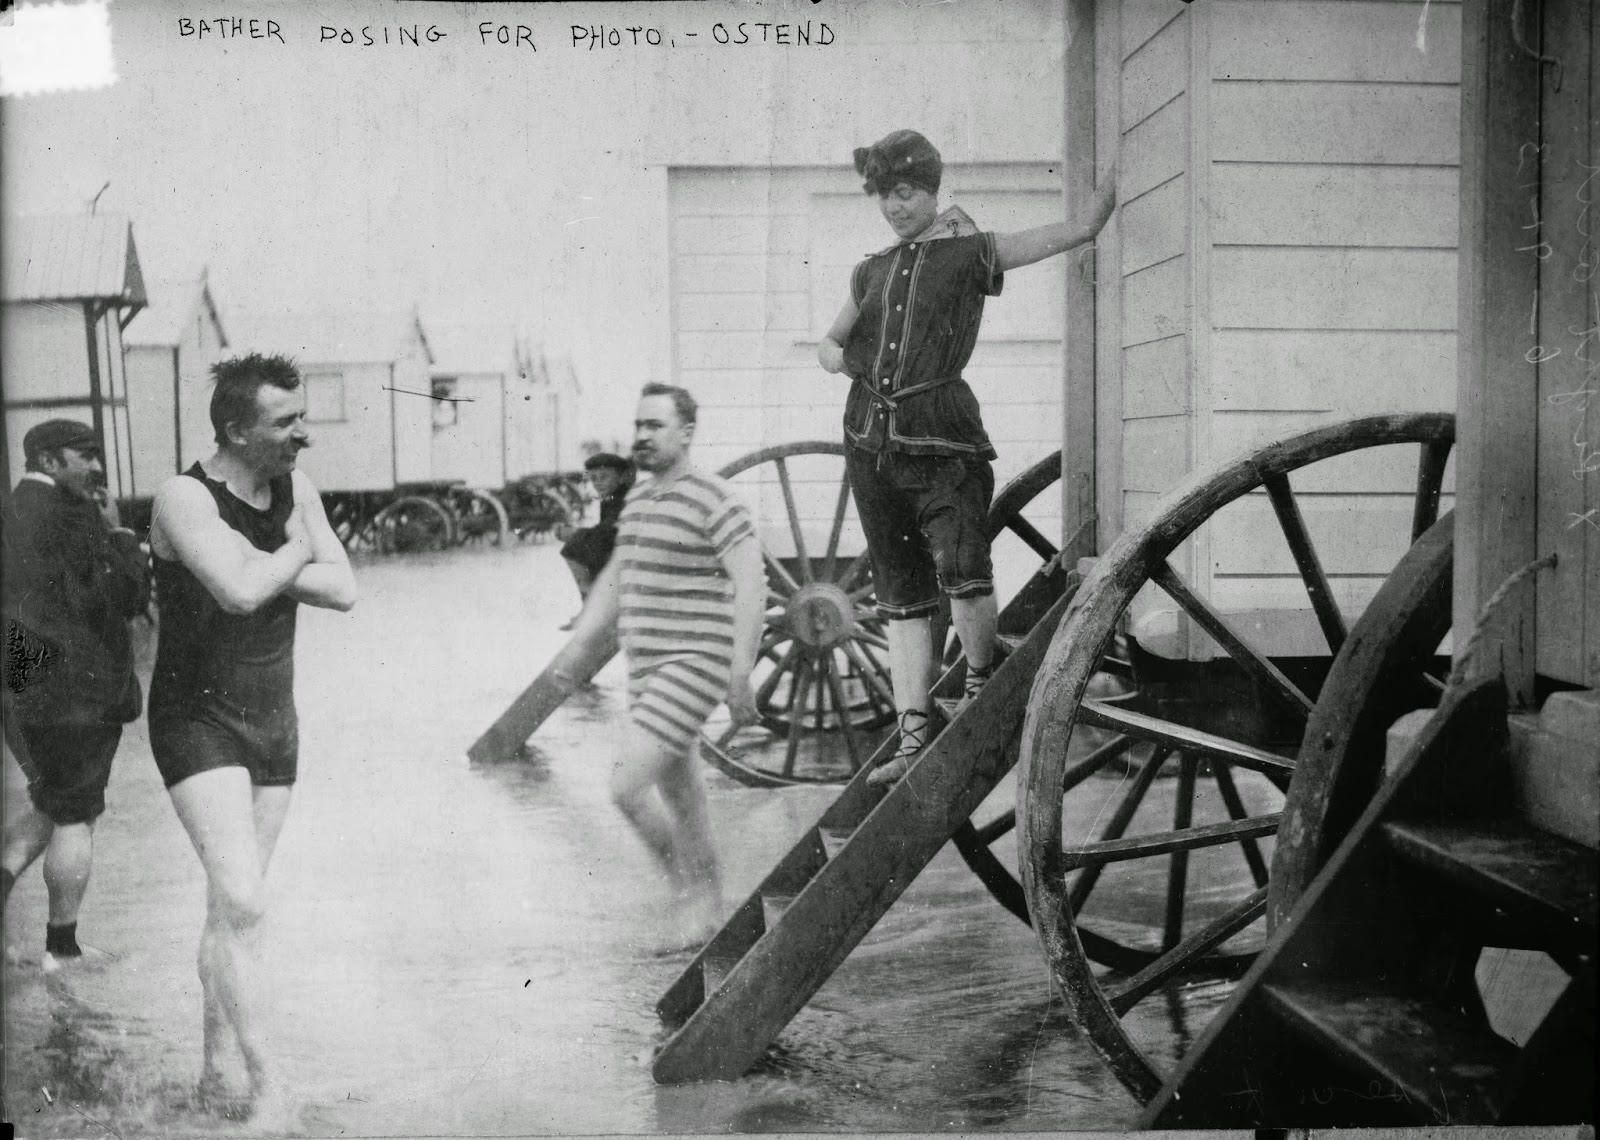 Going Swimming On Wheels: 50+ Historic Photos Of Bathing Machines From Victorian Era